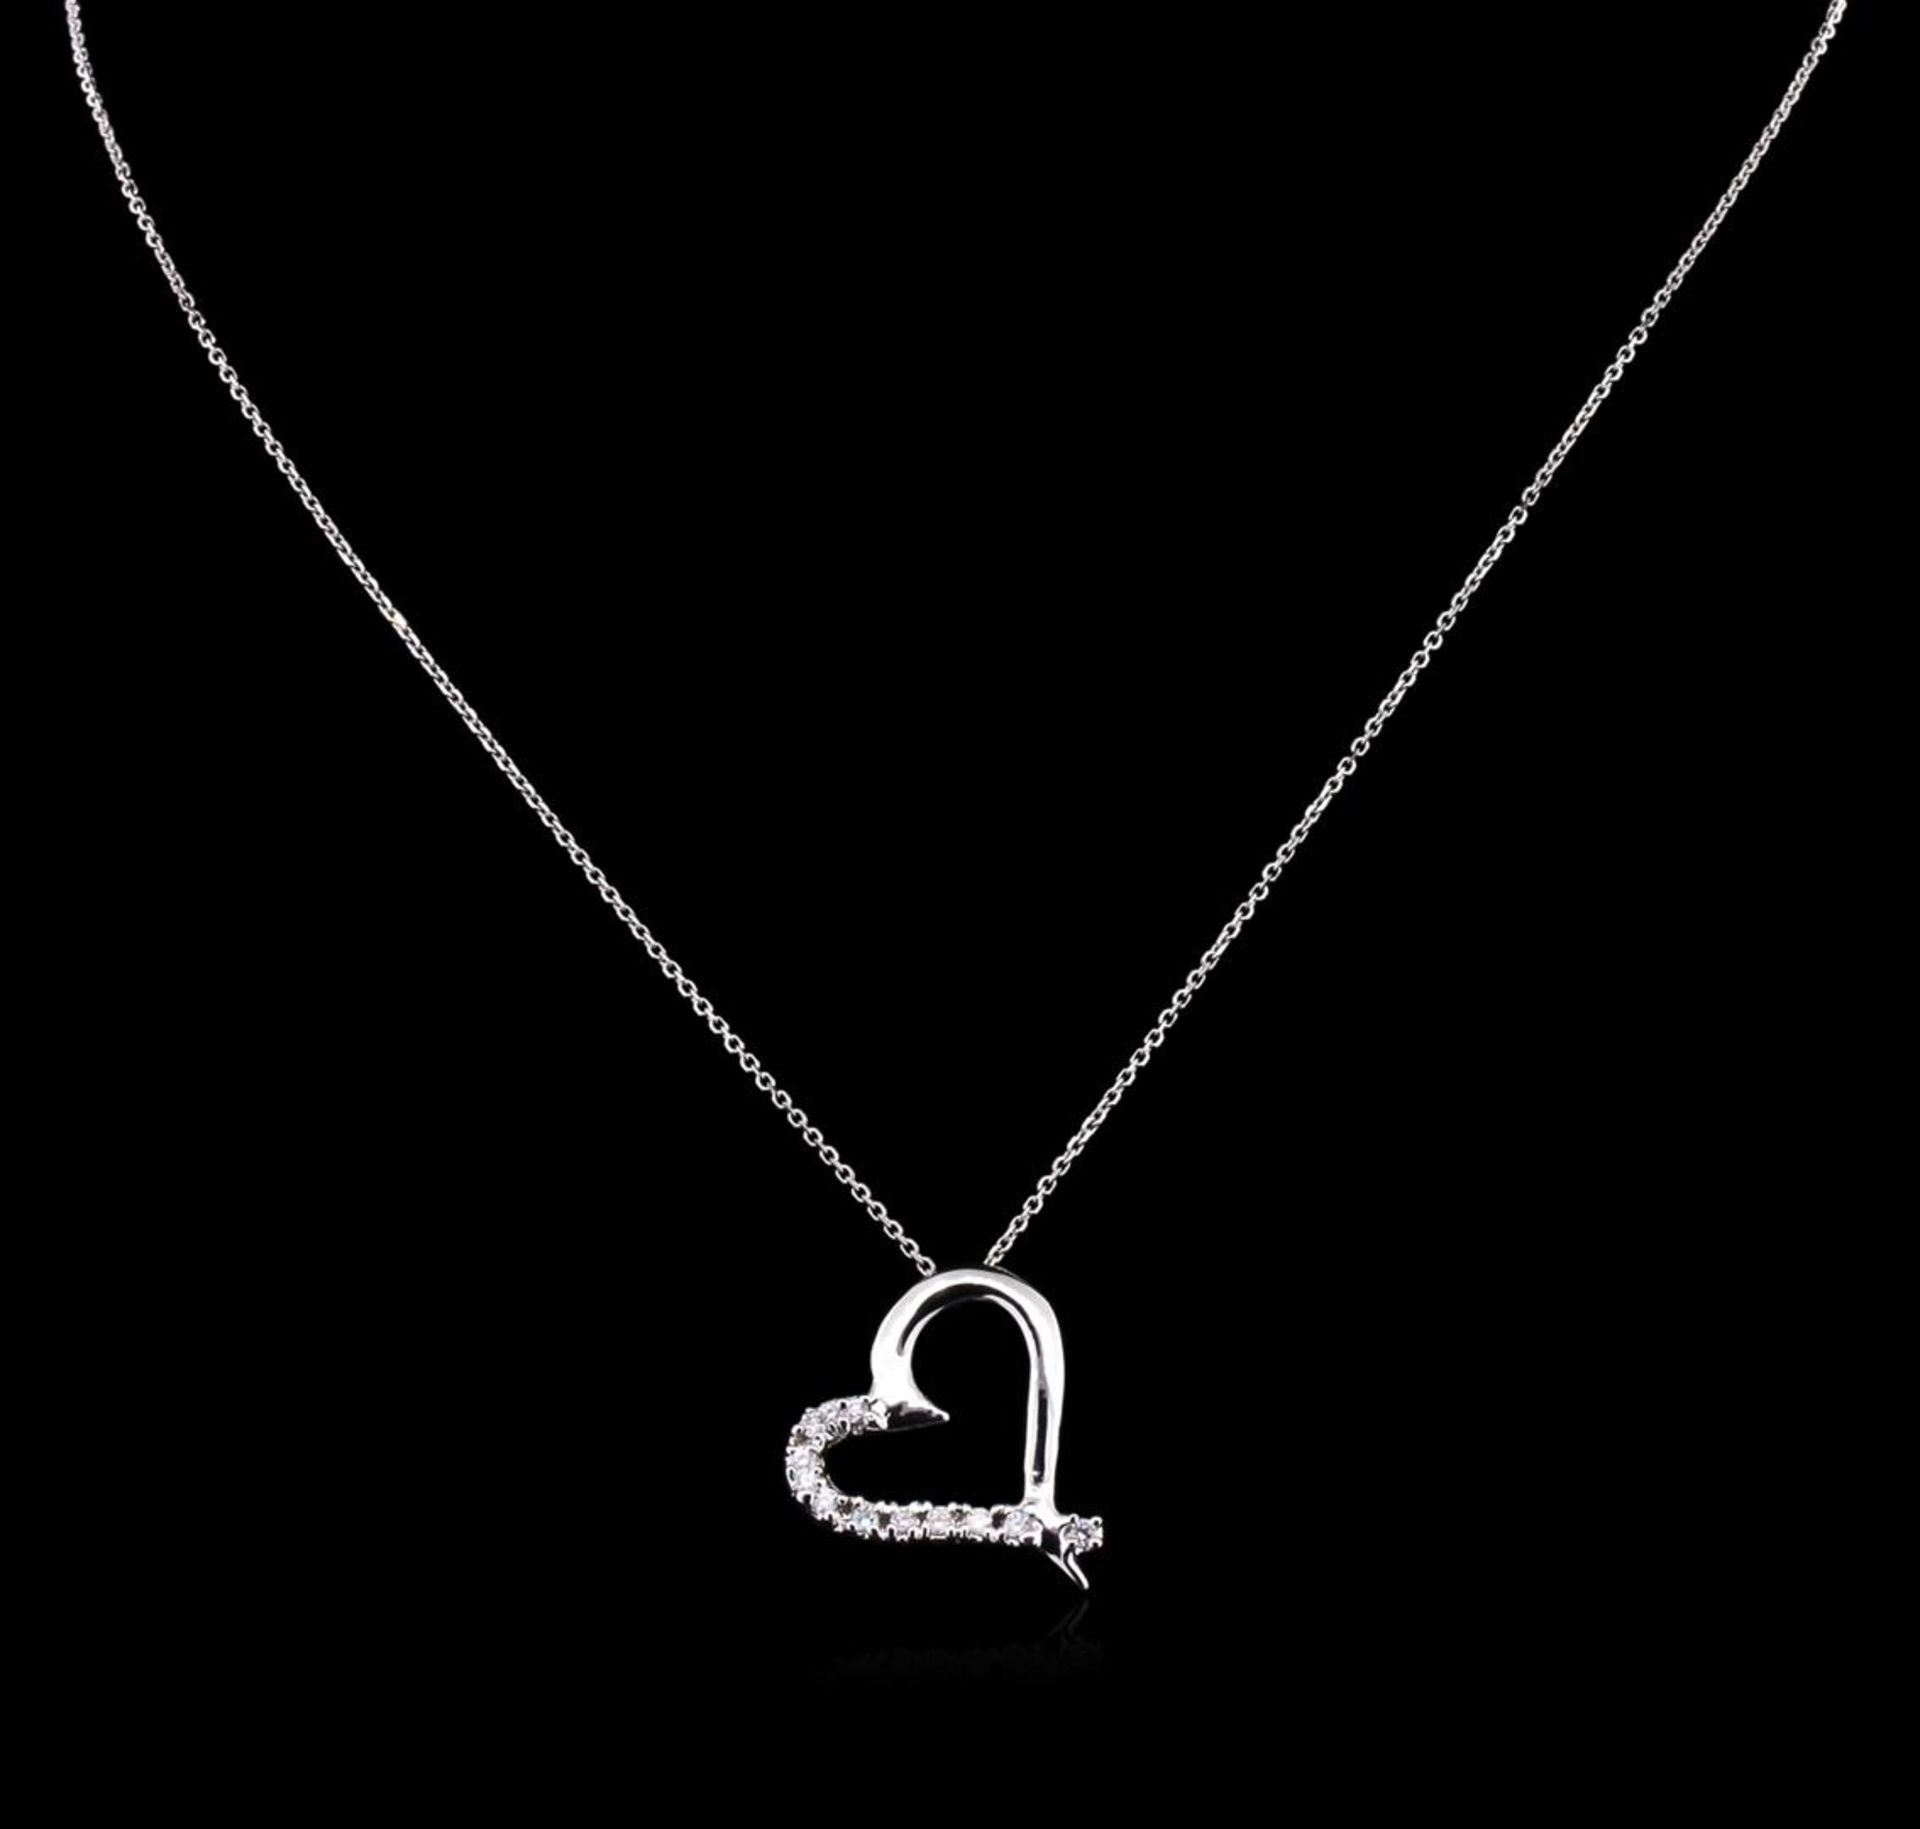 0.45 ctw Diamond Pendant With Chain - 14KT White Gold - Image 2 of 2